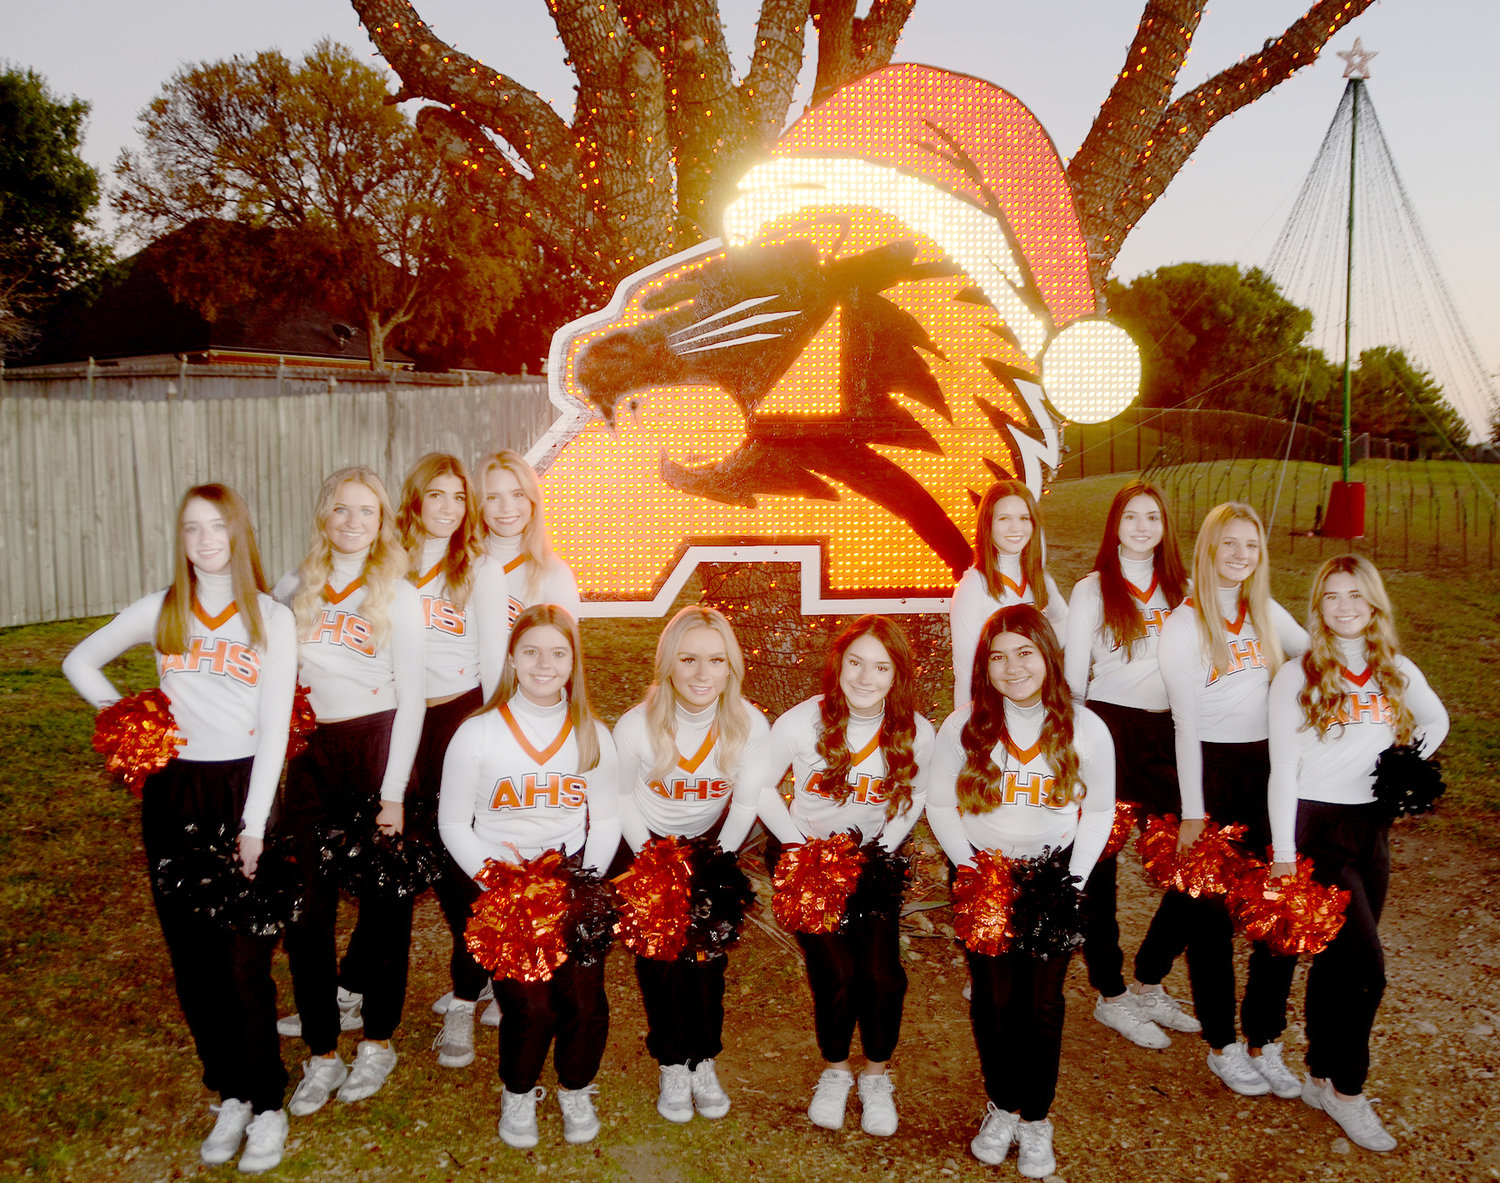 Aledo High School cheerleaders are geared up for both the football playoffs and the holiday season. Shown are (front row, from left) Taylor Prestage, Ella Stuart, Rachel Taylor, and Alexa Saenz and (back row) Ava Schmitz, McKenna Weatherley, Avery Mulkey, Ruthie Pulliam, Taylor Parsons, Chloe Wilson, Daniella Tregellas, and Lilly Wilson.